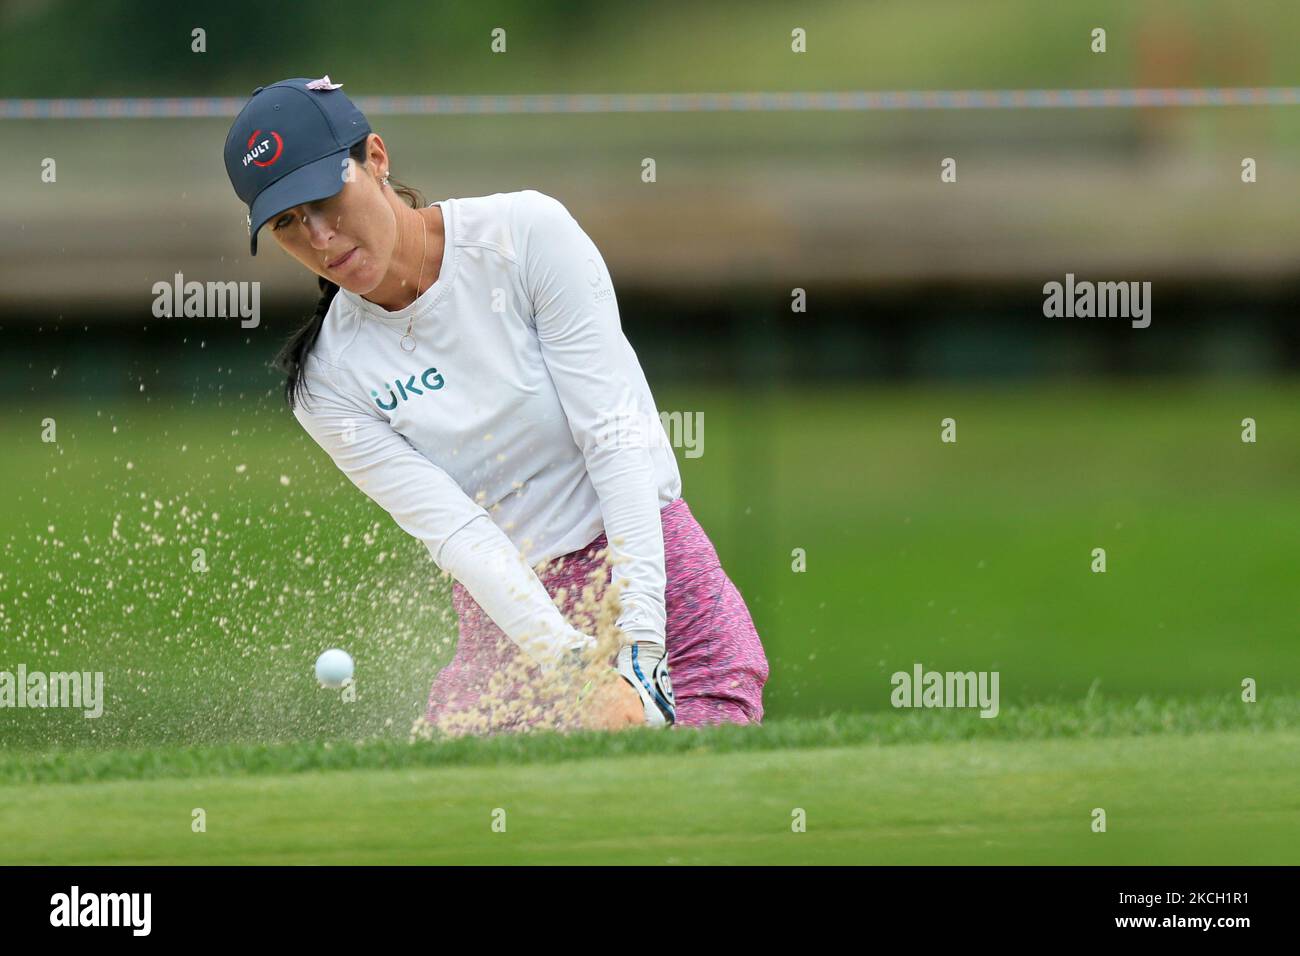 Jaye Marie Green hits out of the bunker toward the 10th green during the first round of the Marathon LPGA Classic presented by Dana golf tournament at Highland Meadows Golf Club in Sylvania, Ohio USA, on Thursday, July 8, 2021. (Photo by Jorge Lemus/NurPhoto) Stock Photo